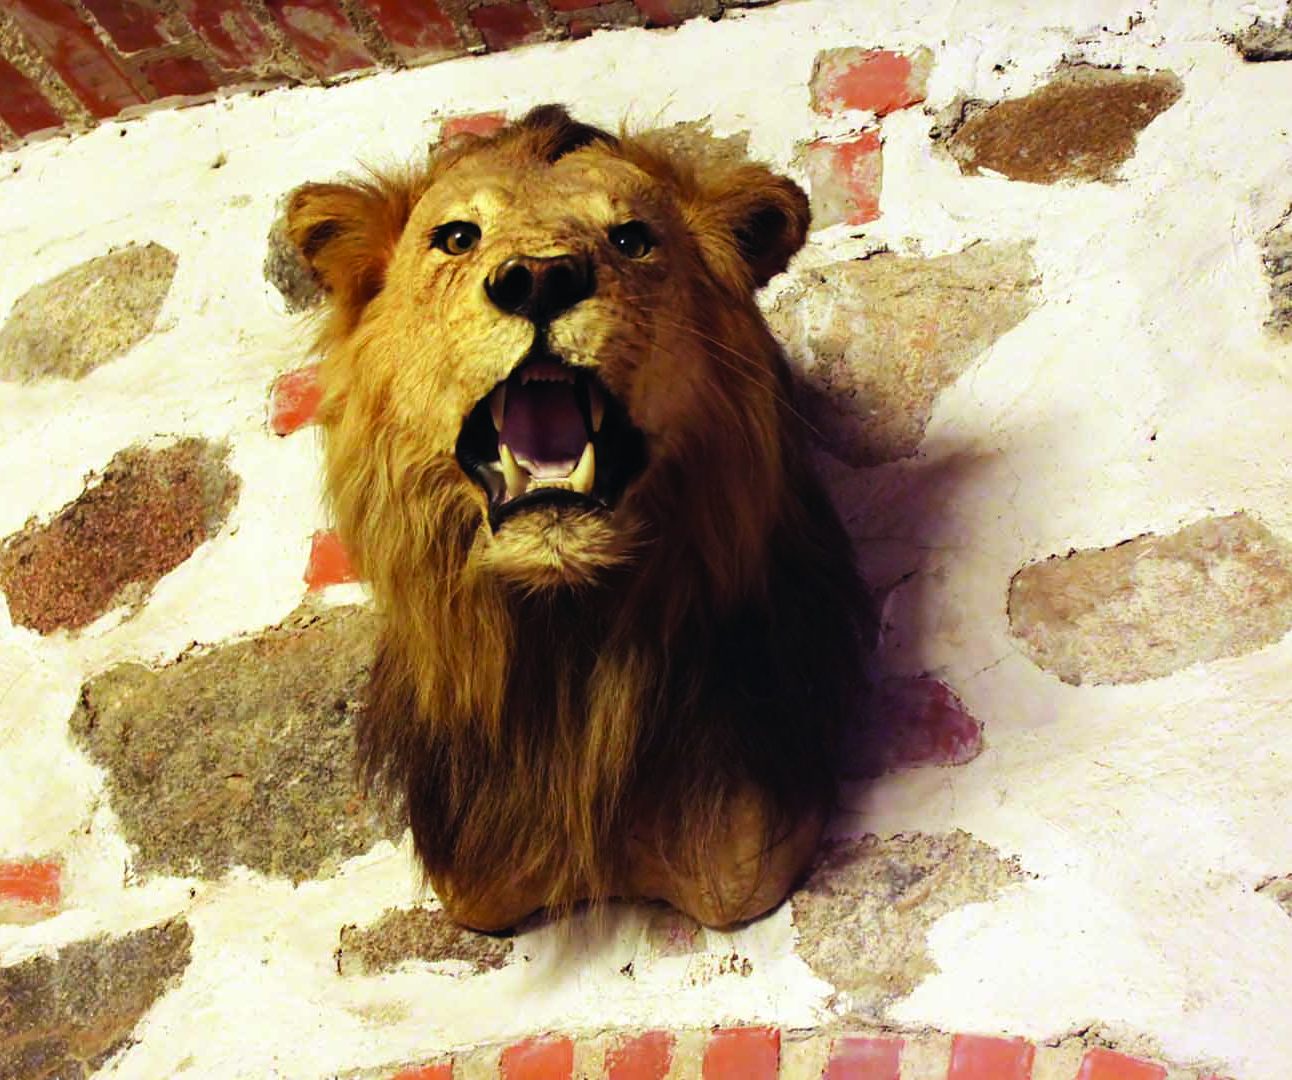 The head of a dead lion mounted on a wall